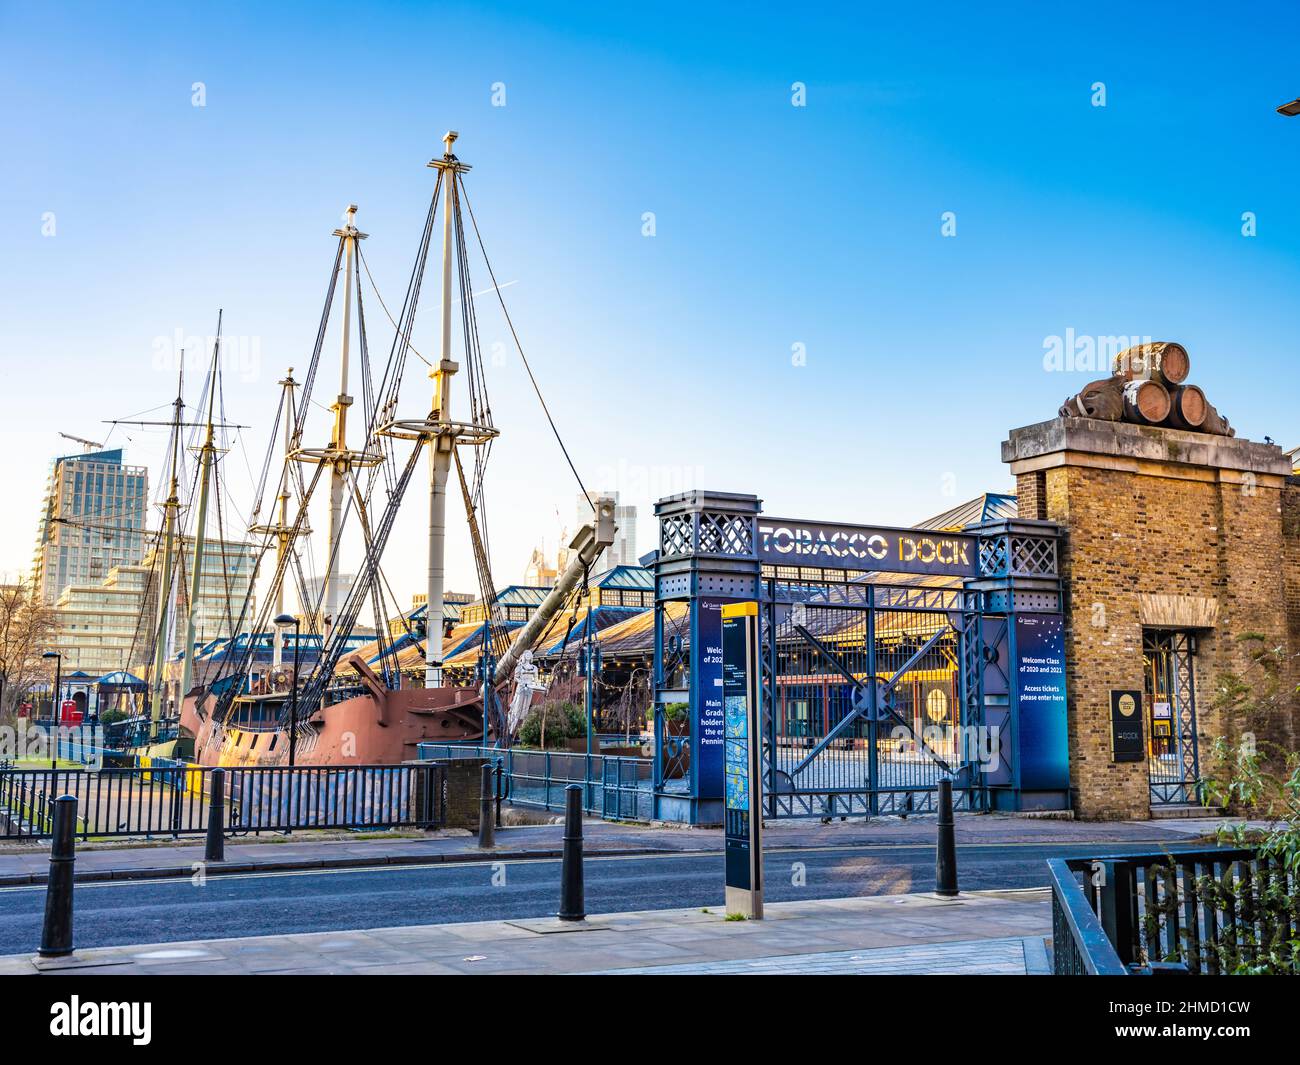 Tabacco Dock, Wapping, Old pirate ship. Stock Photo